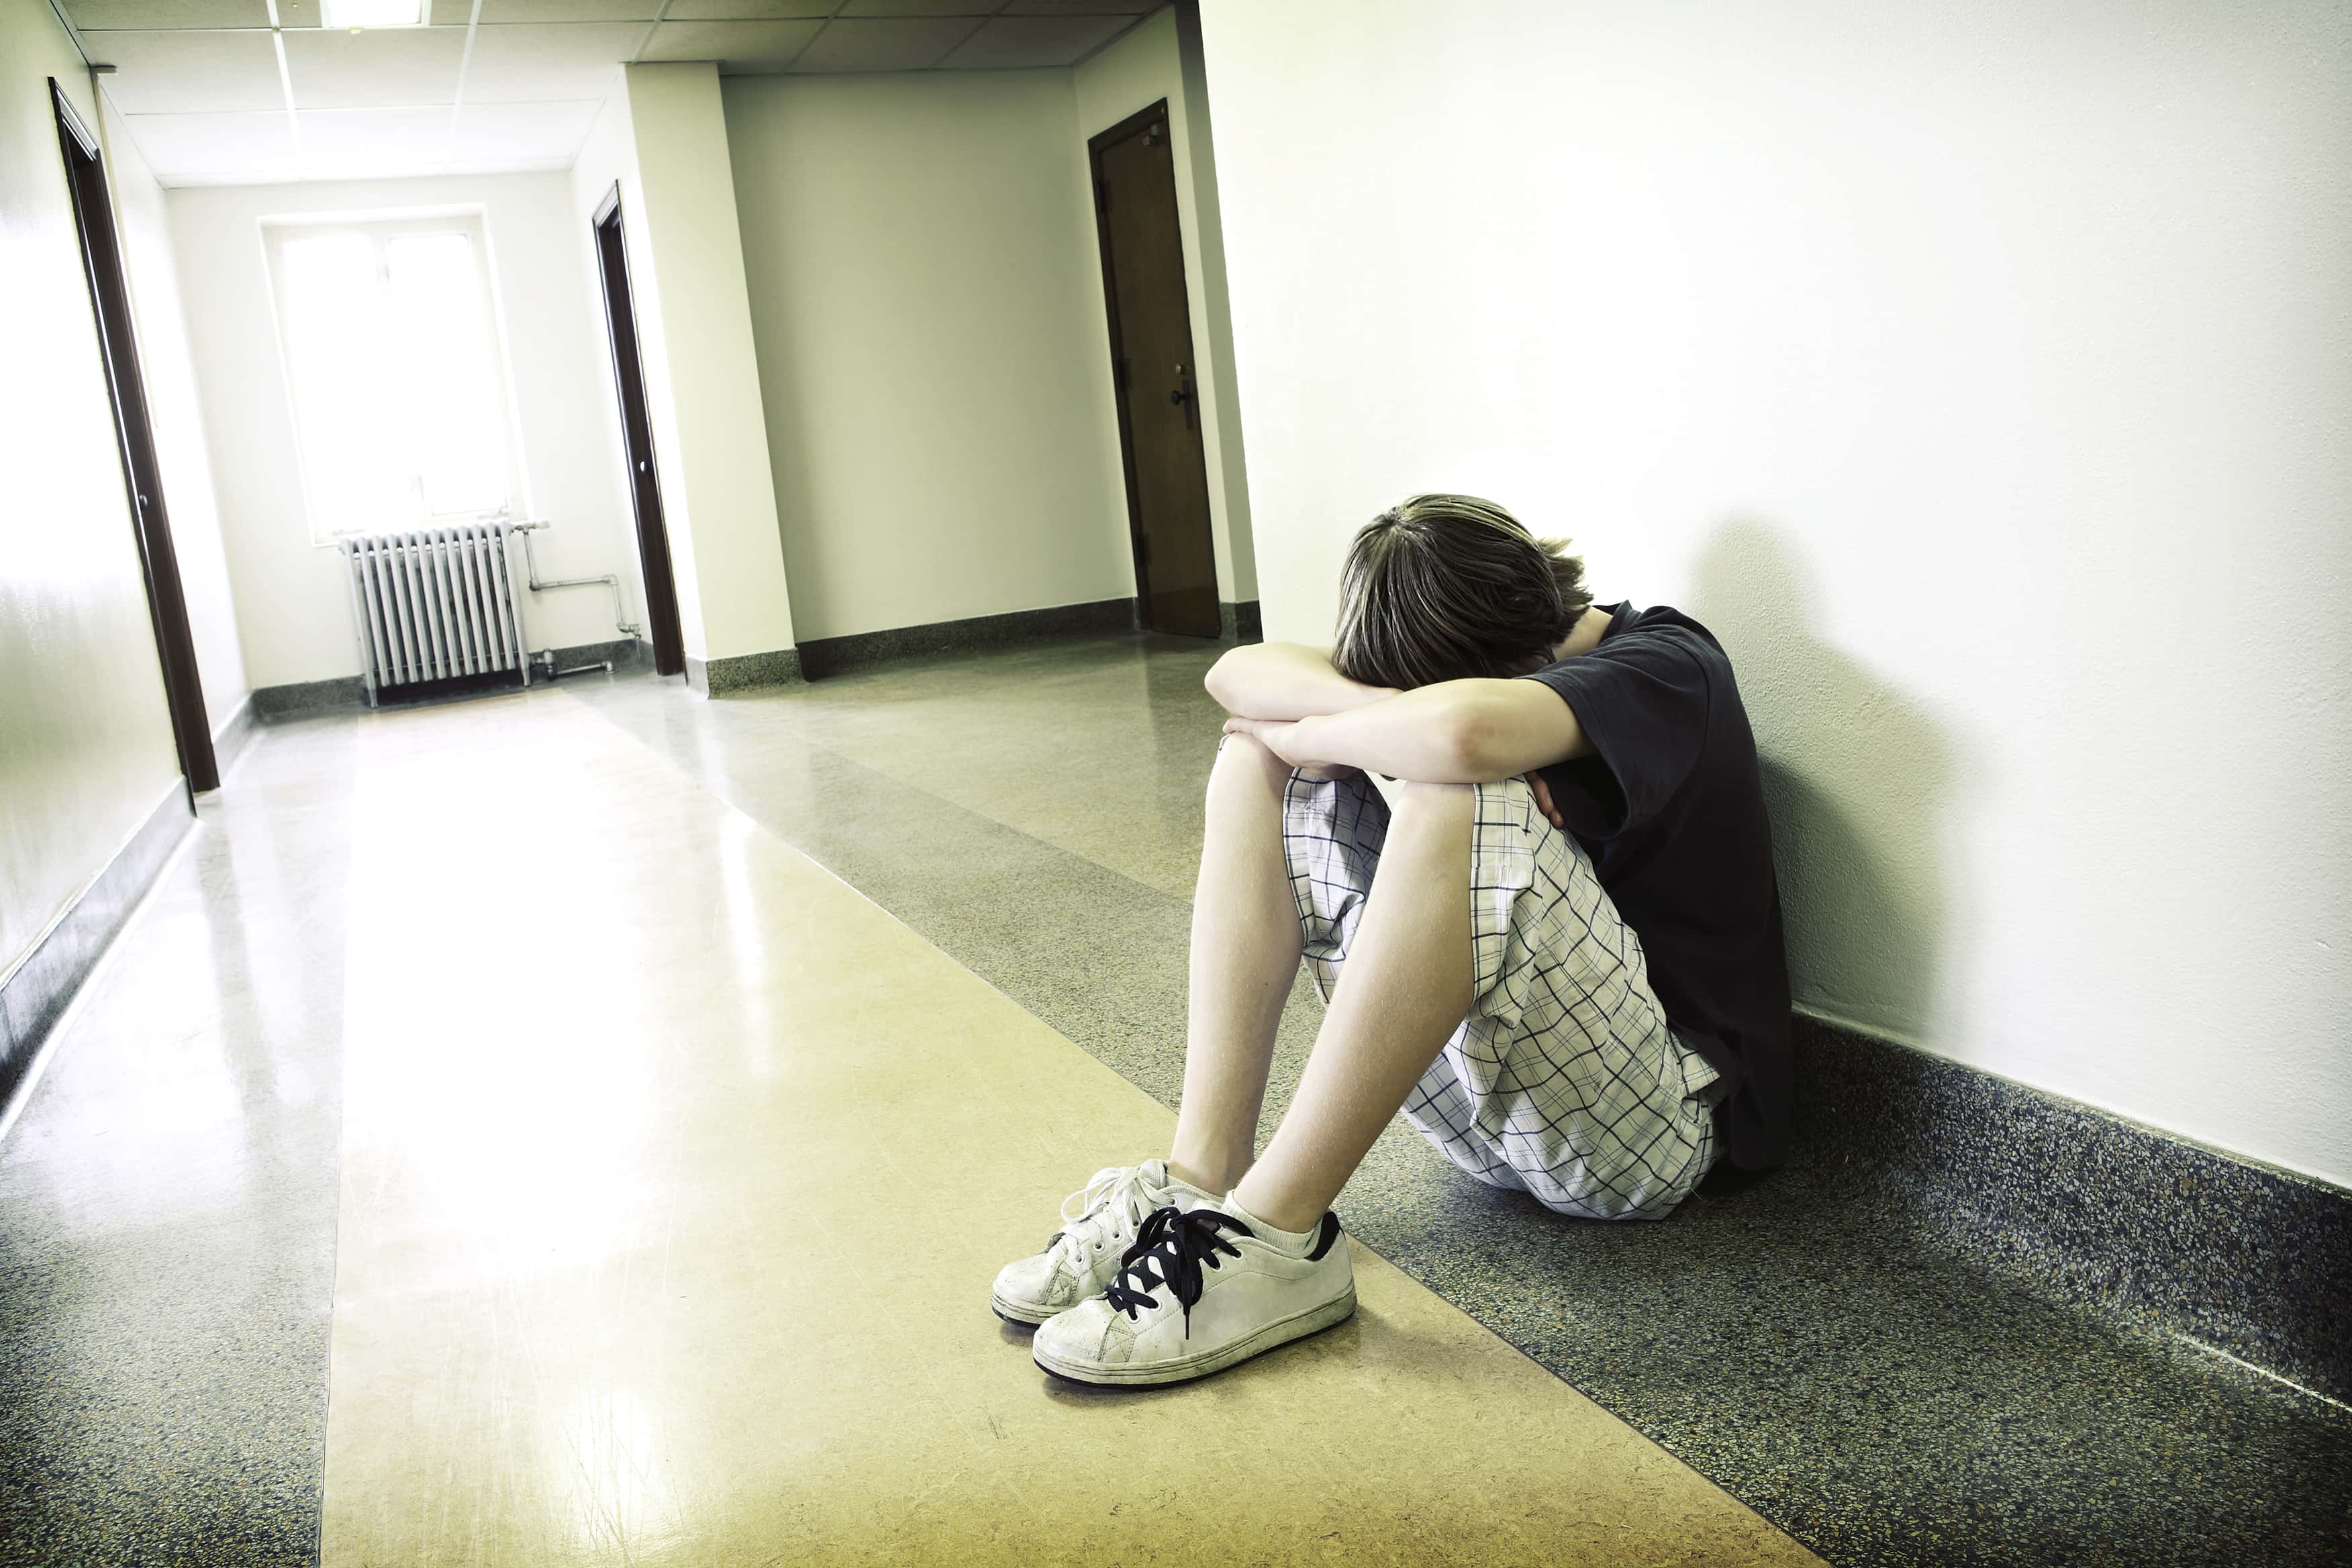 “Troubled Teen” Programs facts